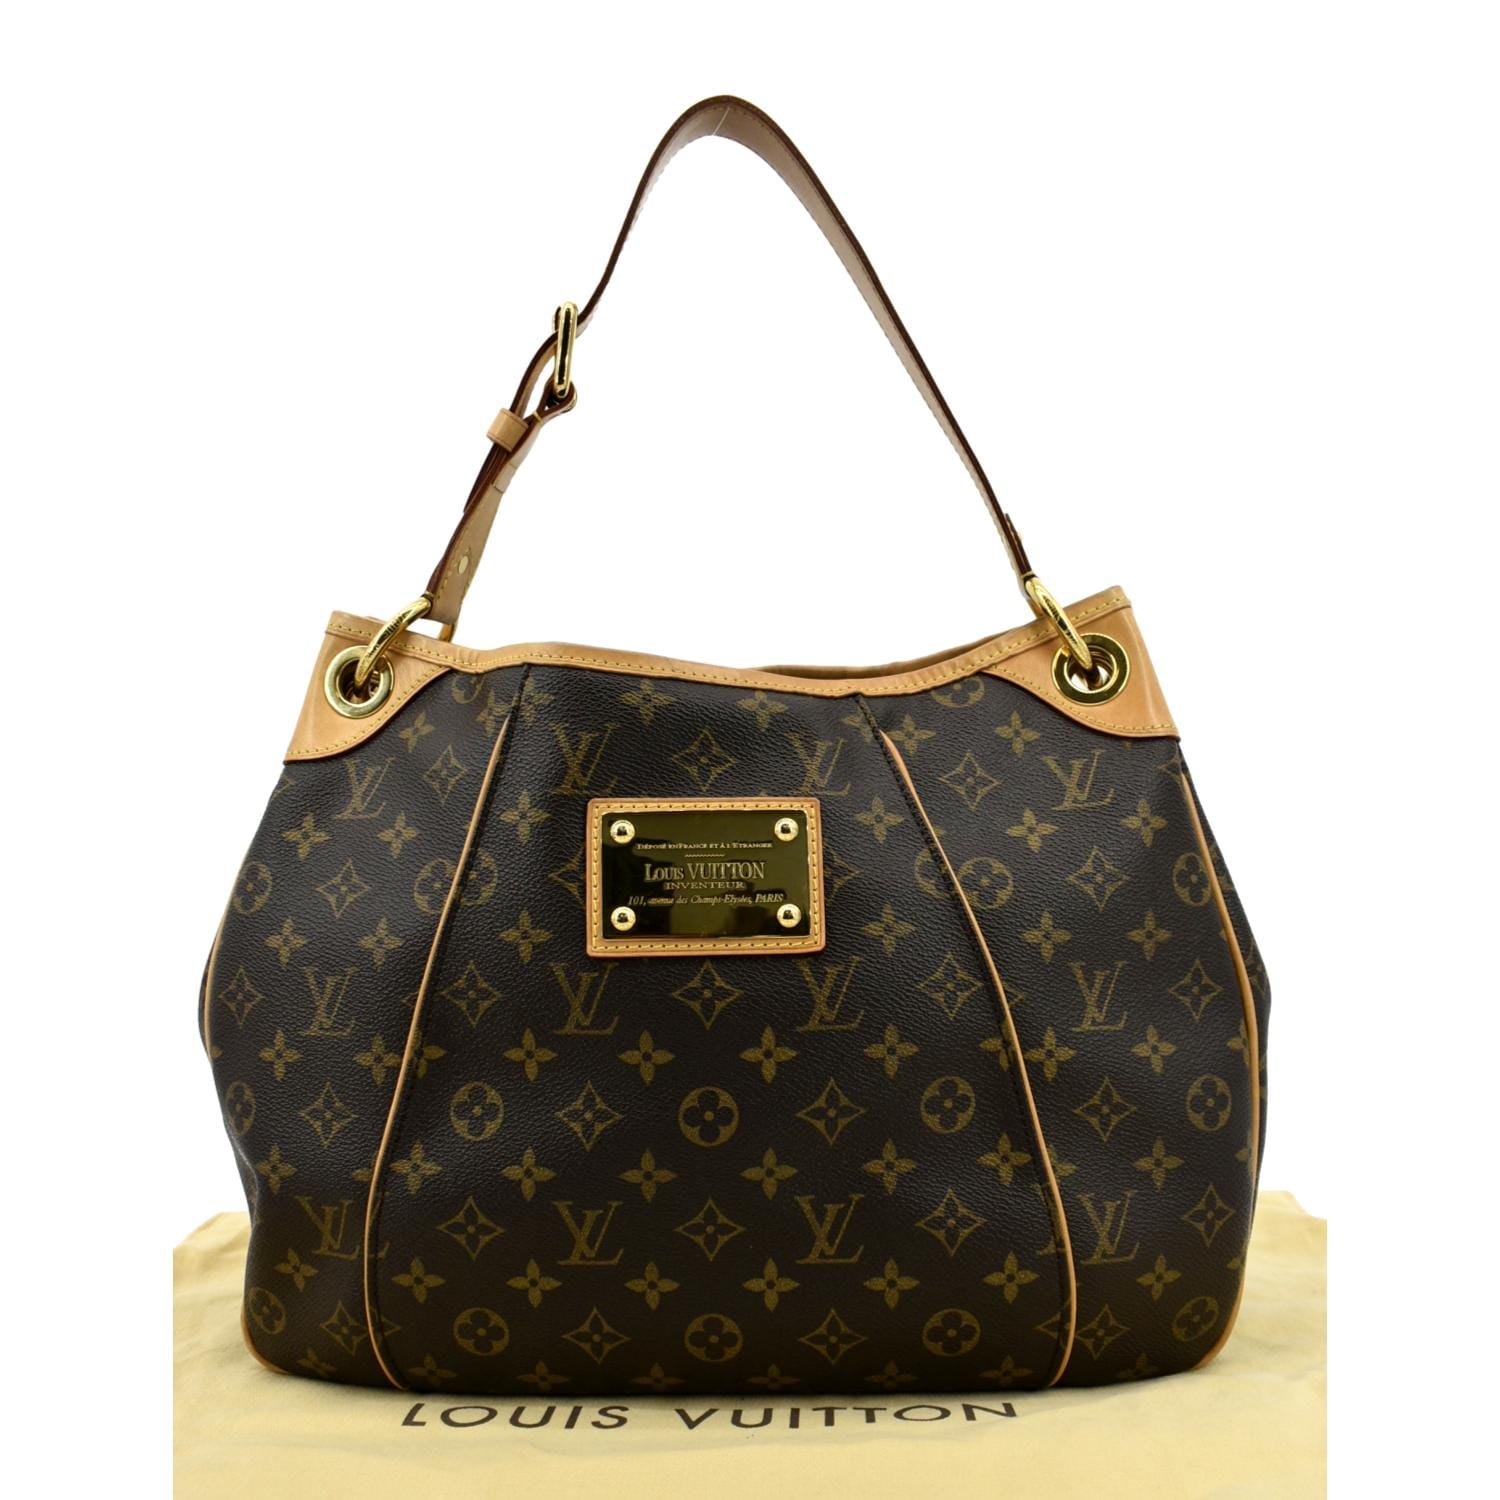 Louis Vuitton Pre-Owned Accessories for Women - Shop on FARFETCH